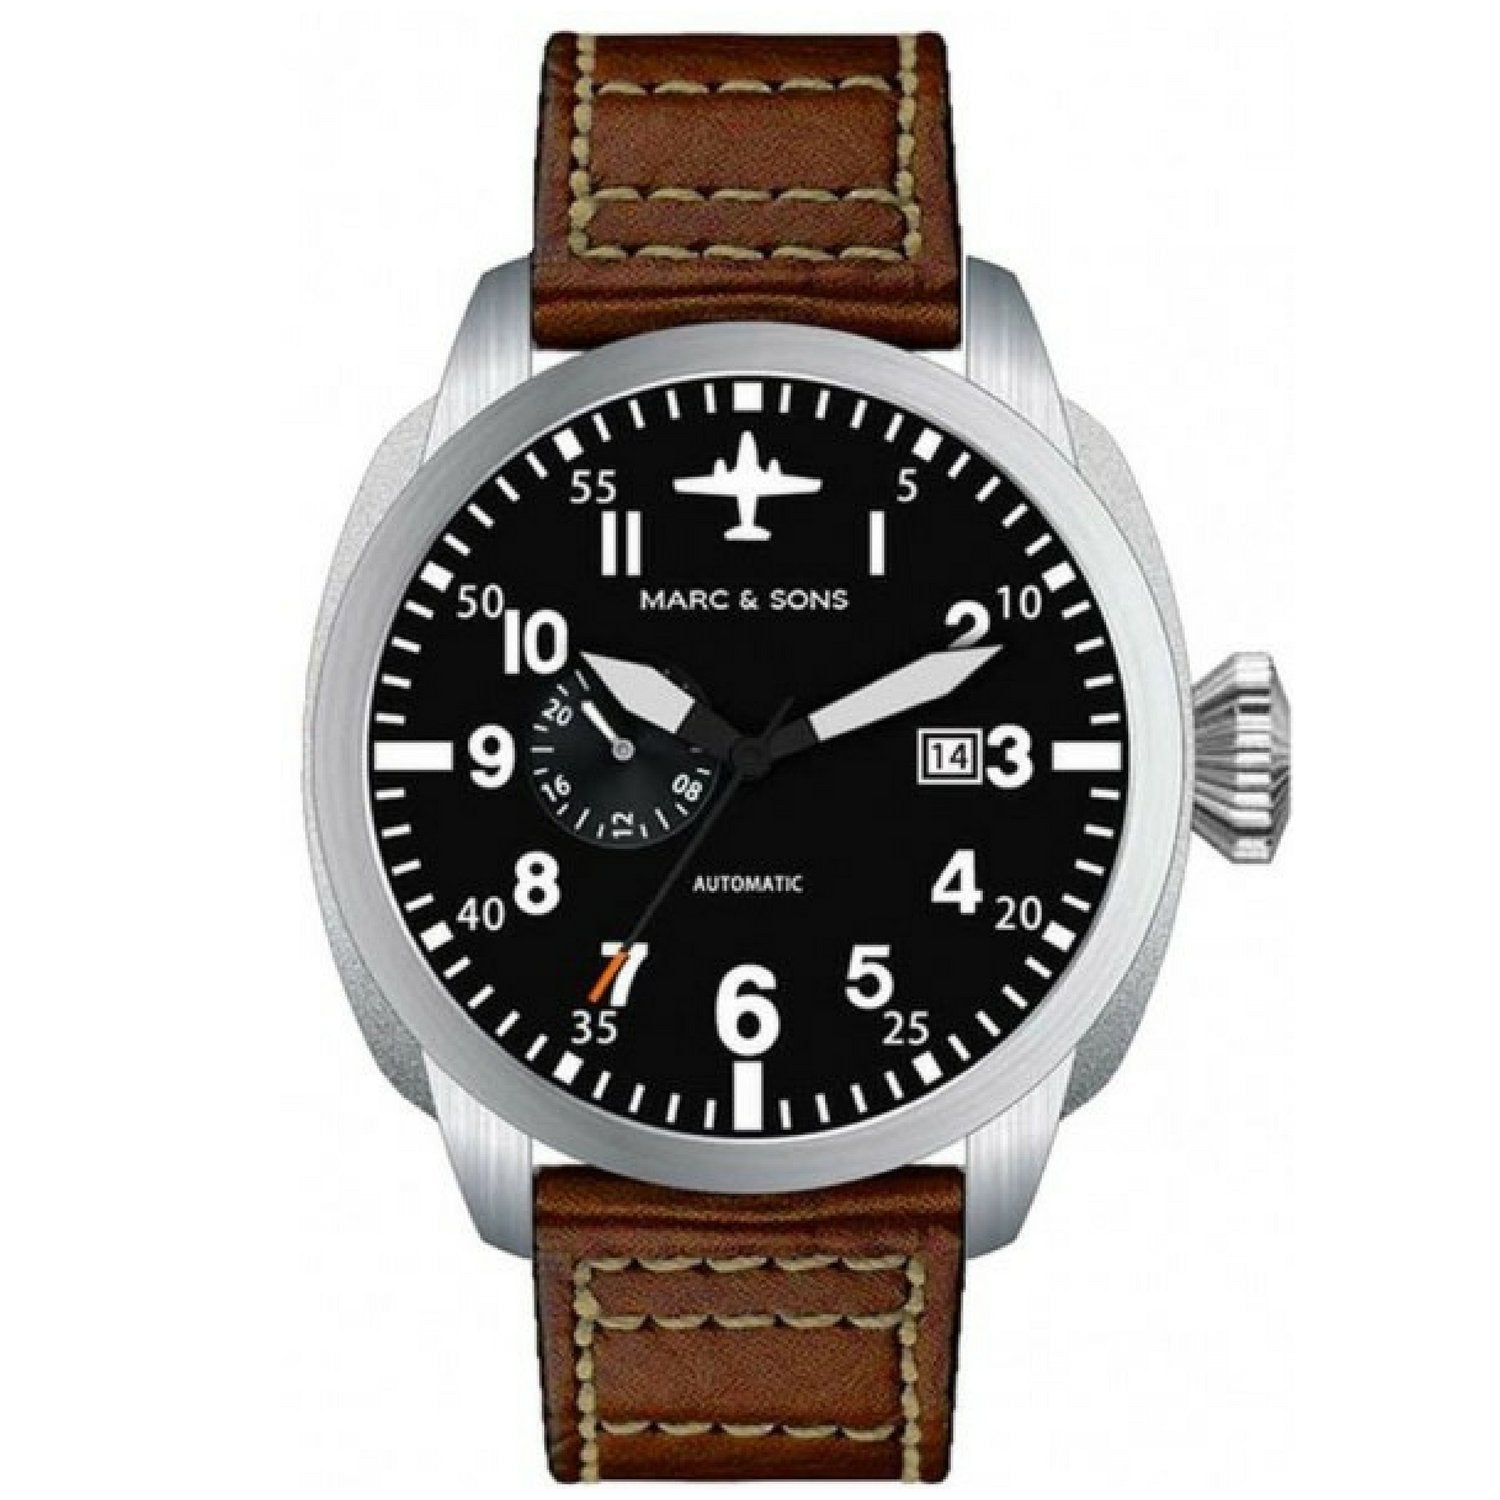 MARC & SONS Automatic Pilot Watch  MSF-003